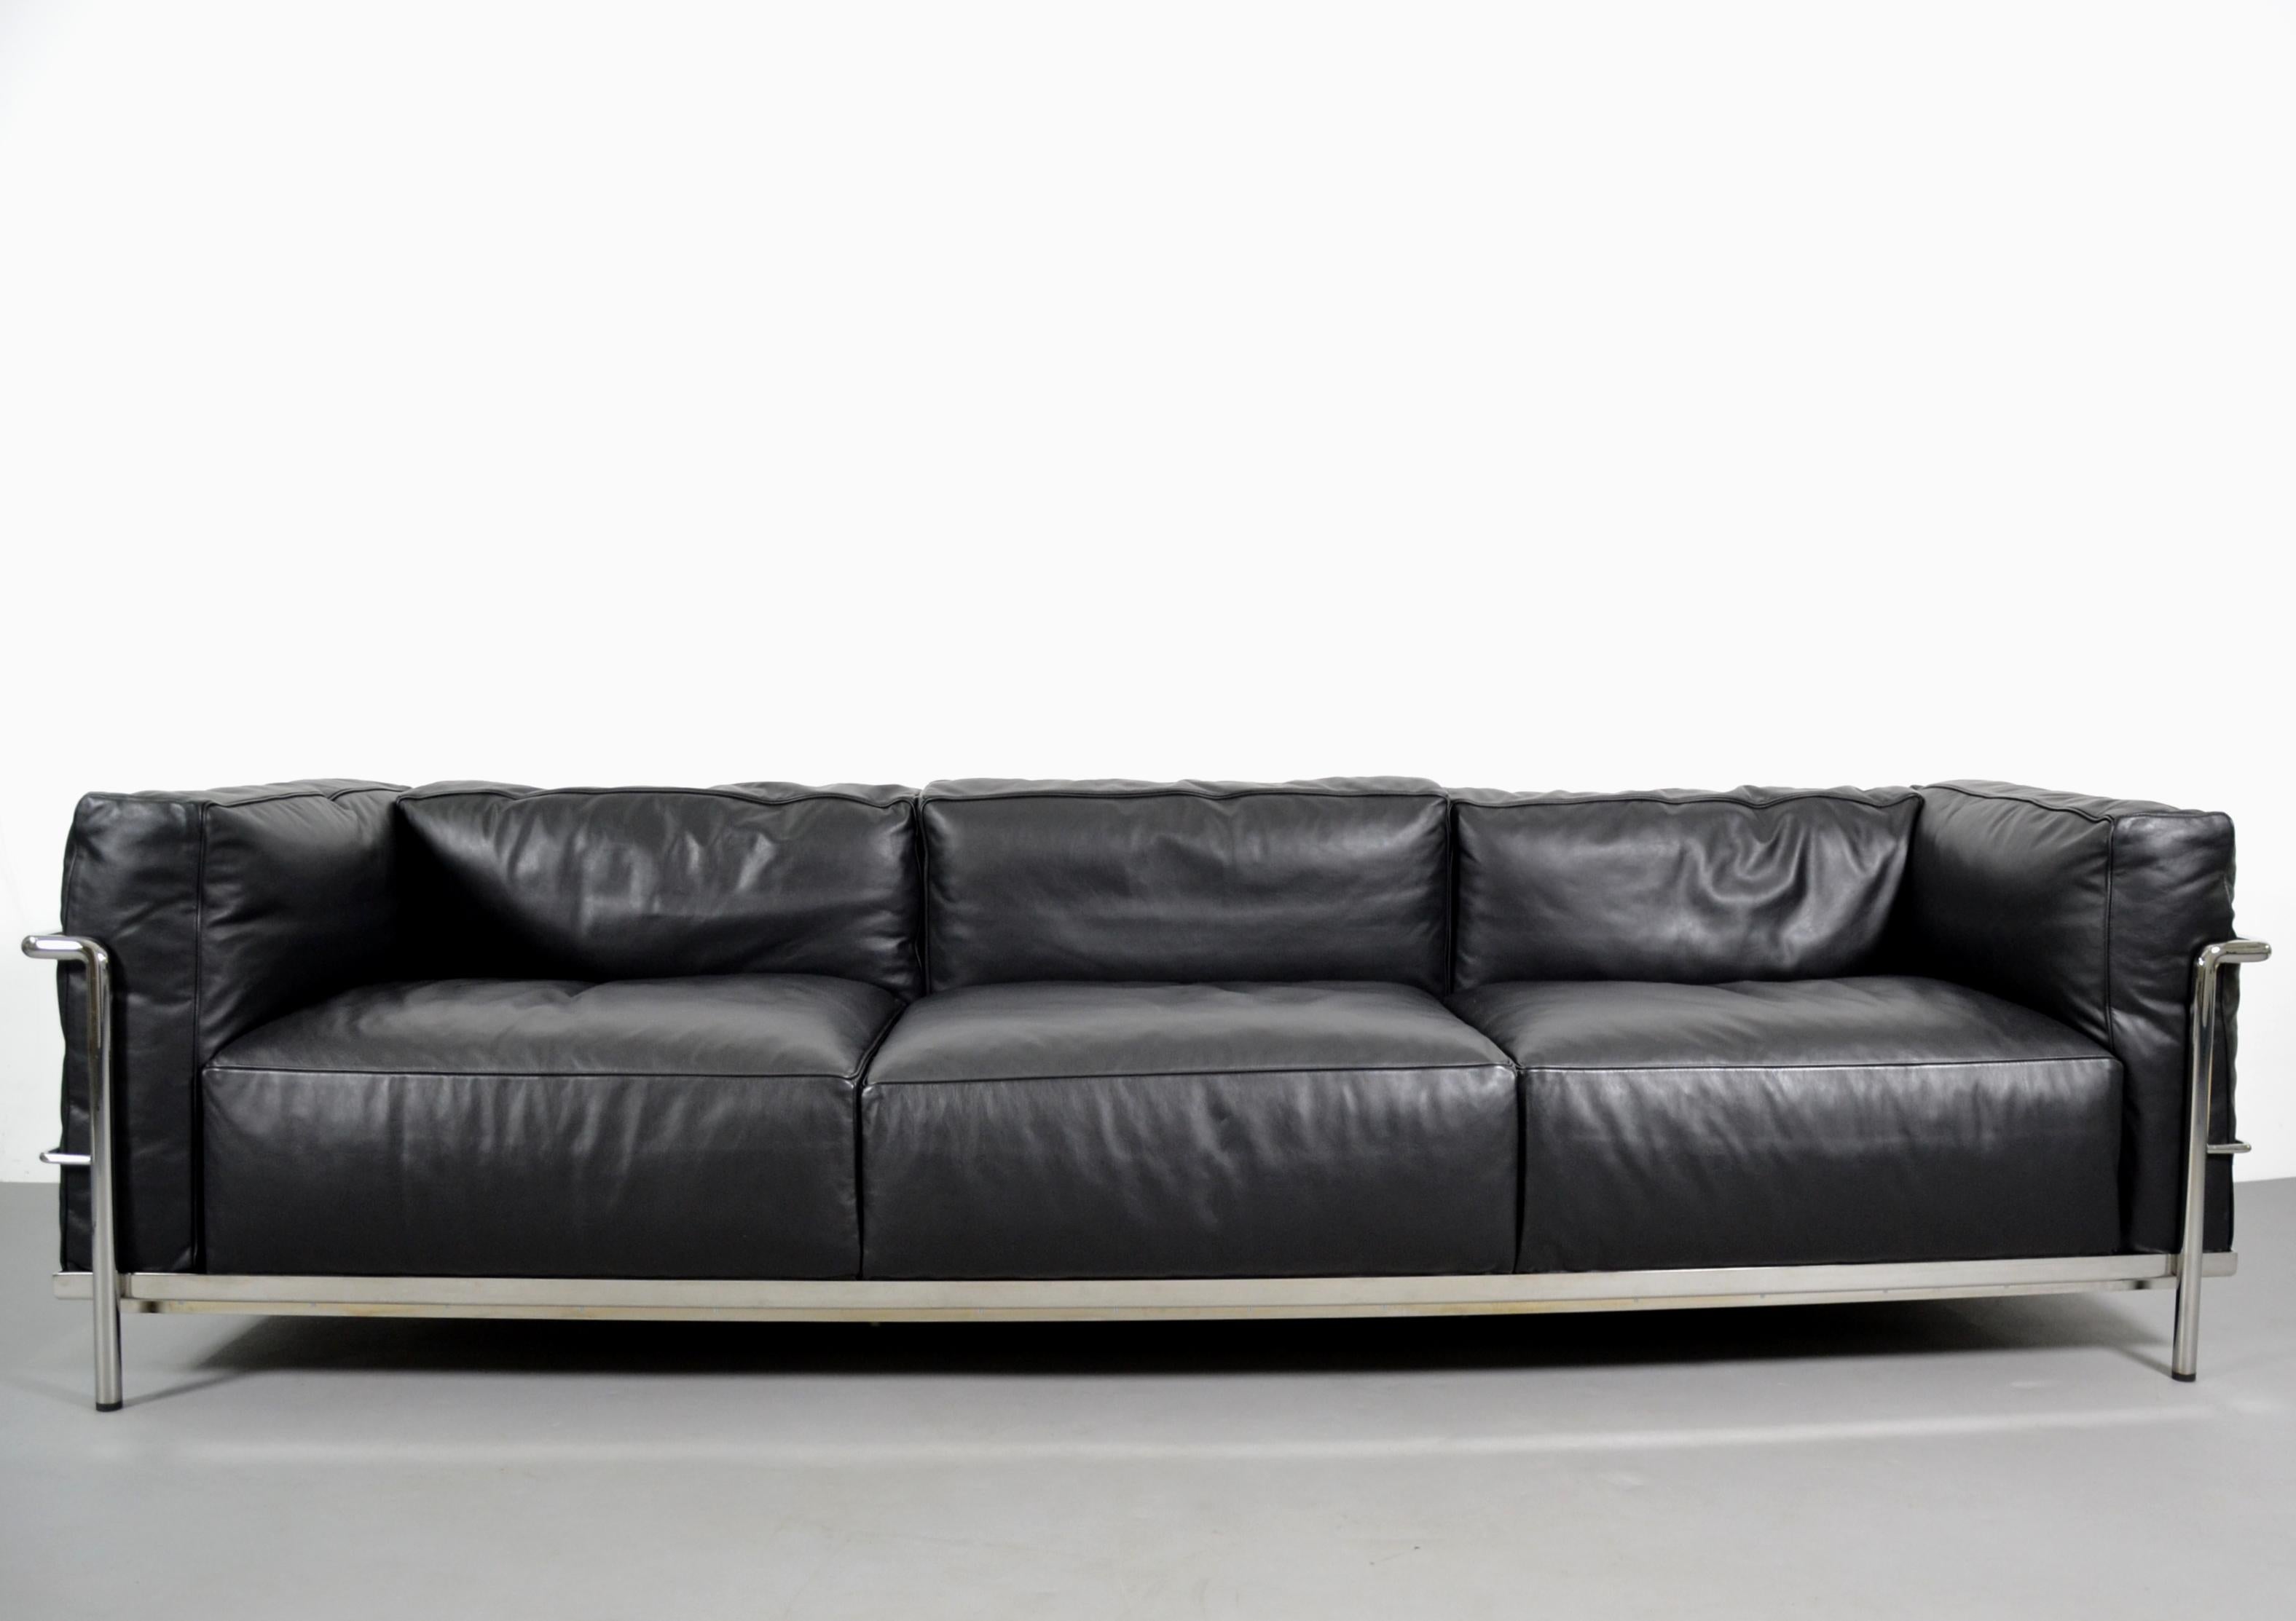 Design: Le Corbusier, Jeanneret, Perriand from 1928
Manufacturer: Cassina
Age: circa 2015
Condition: very good condition
Model: LC3
Chromed steel frame, with cushions in black leather (leather X) filled with down.
Le Corbusier was an